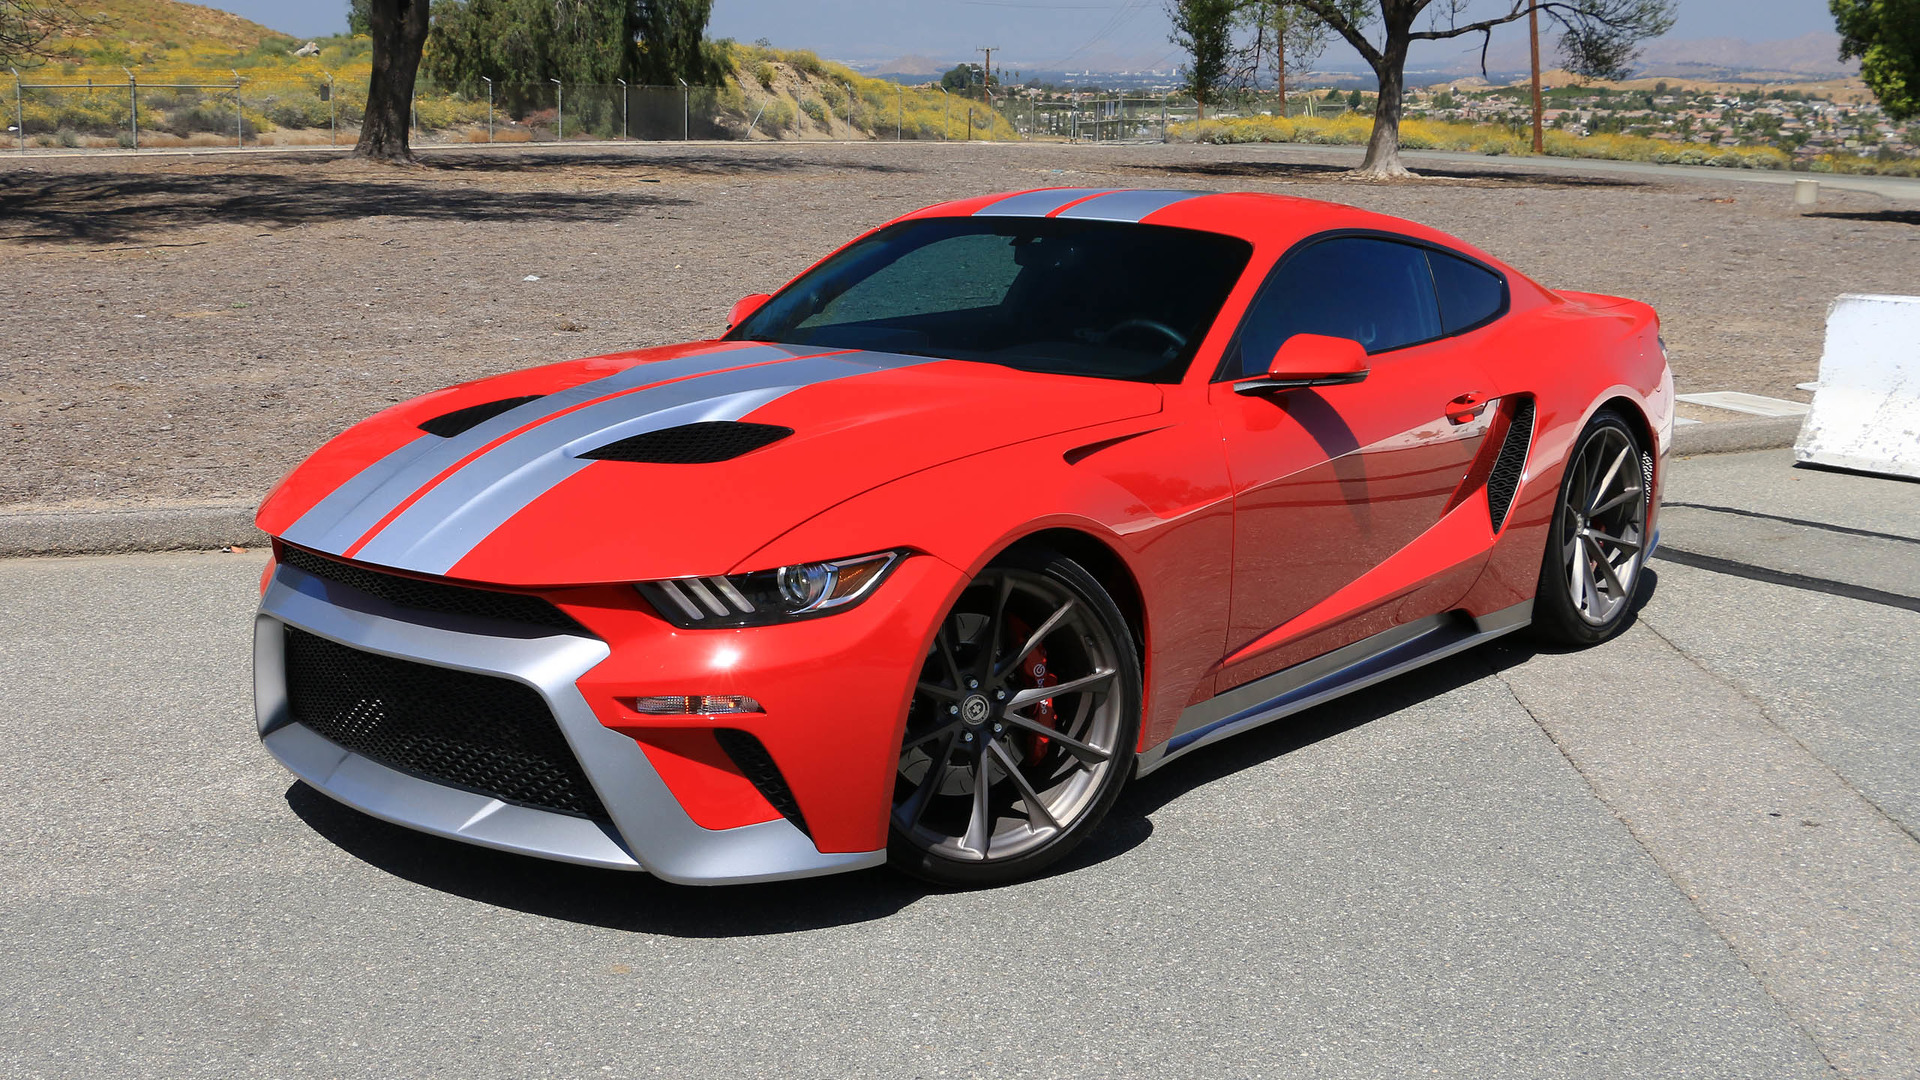 Ford Mustang GT Modified By Zero To 60 Designs First Drive